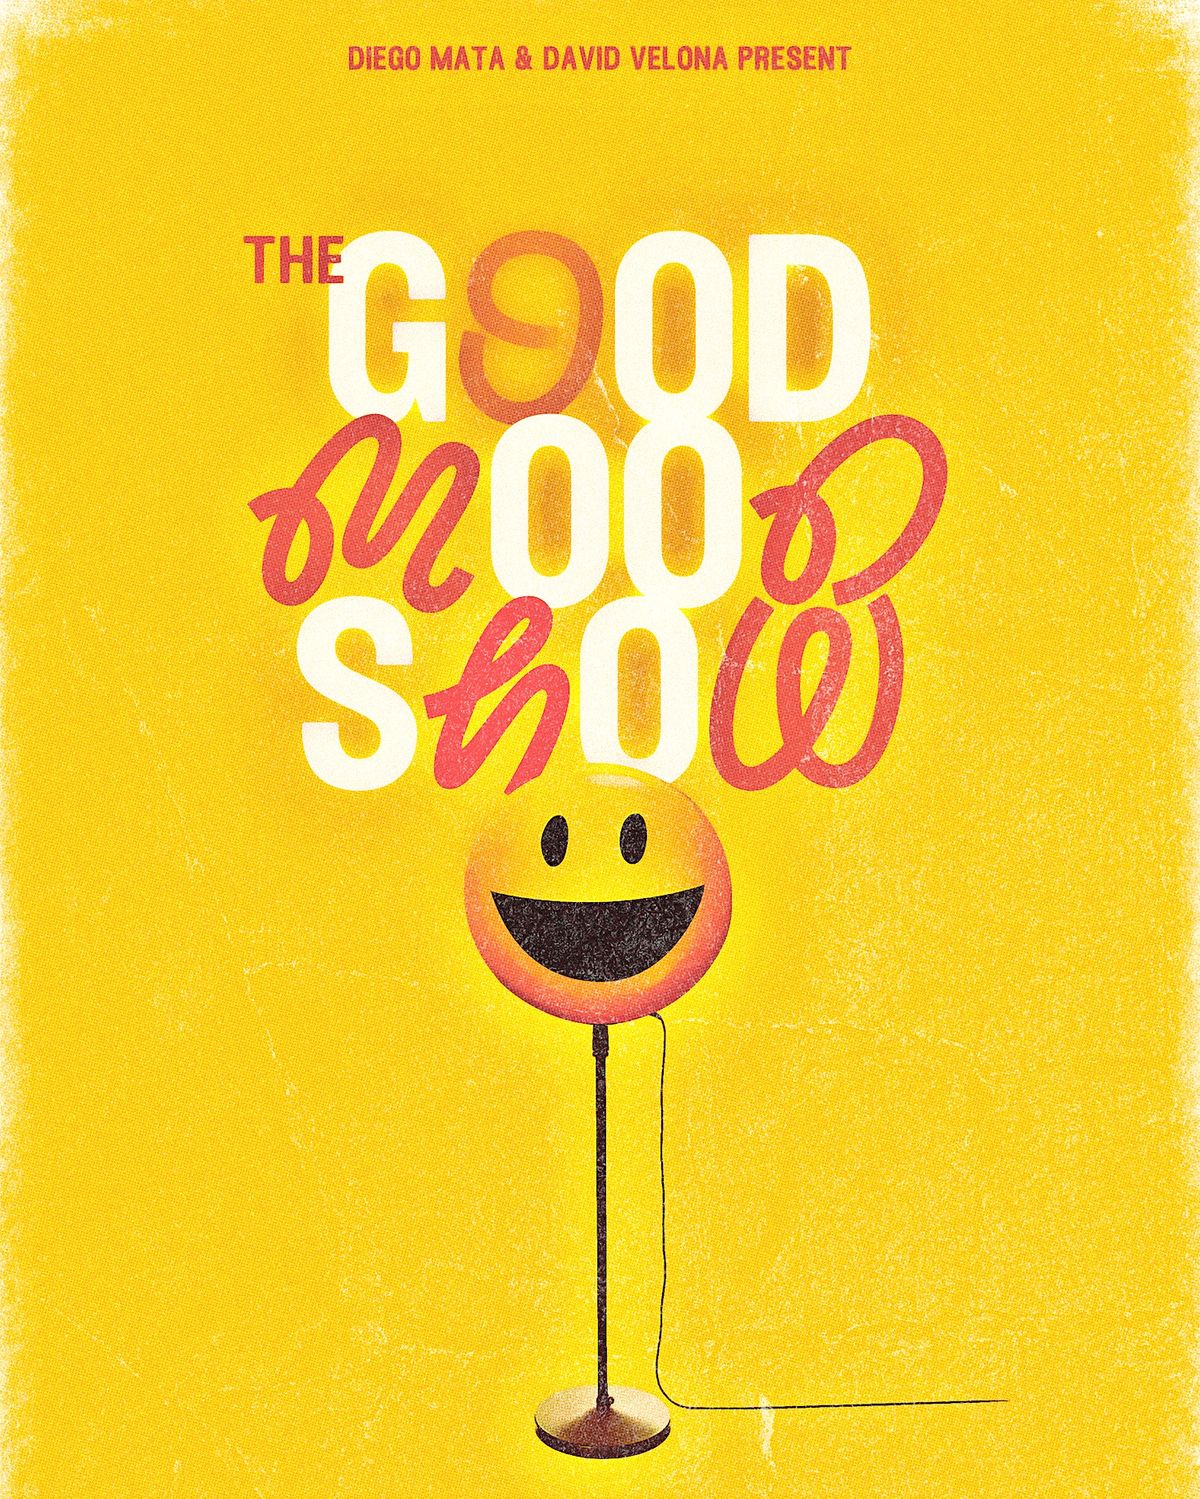 The Good Mood Comedy Show - East Village Comedy Experience